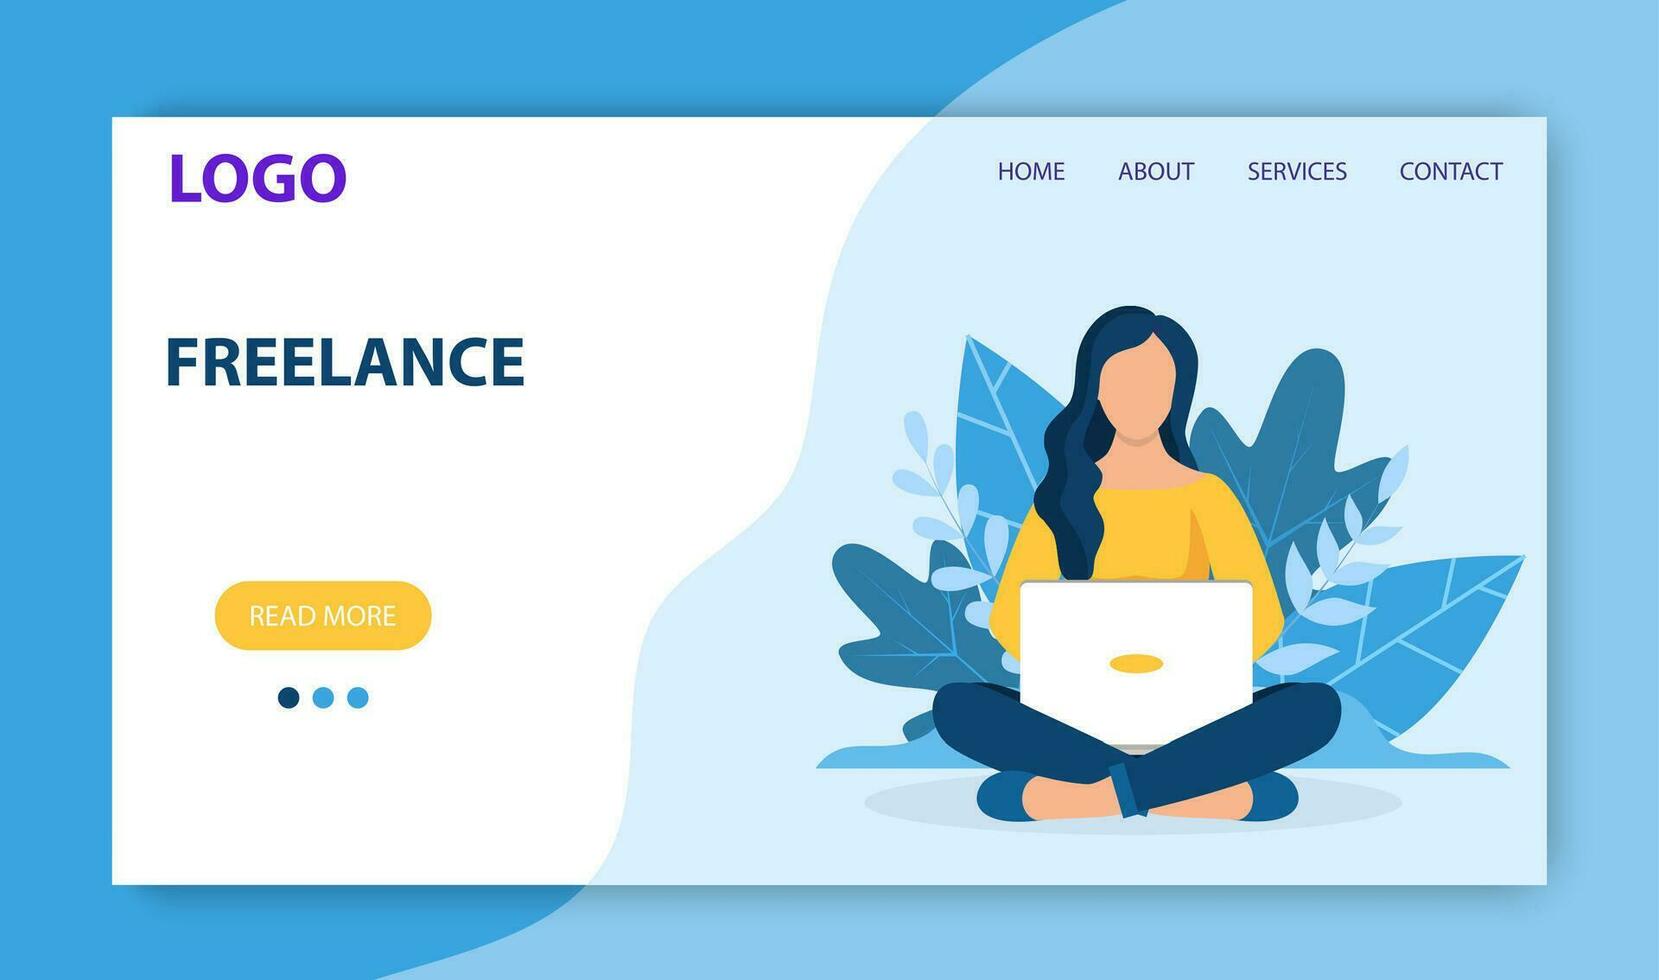 Freelance work landing page template. Concept design for poster, banner, flyer, web page. Woman with laptop sitting in nature with crossed legs. Vector illustration in flat style